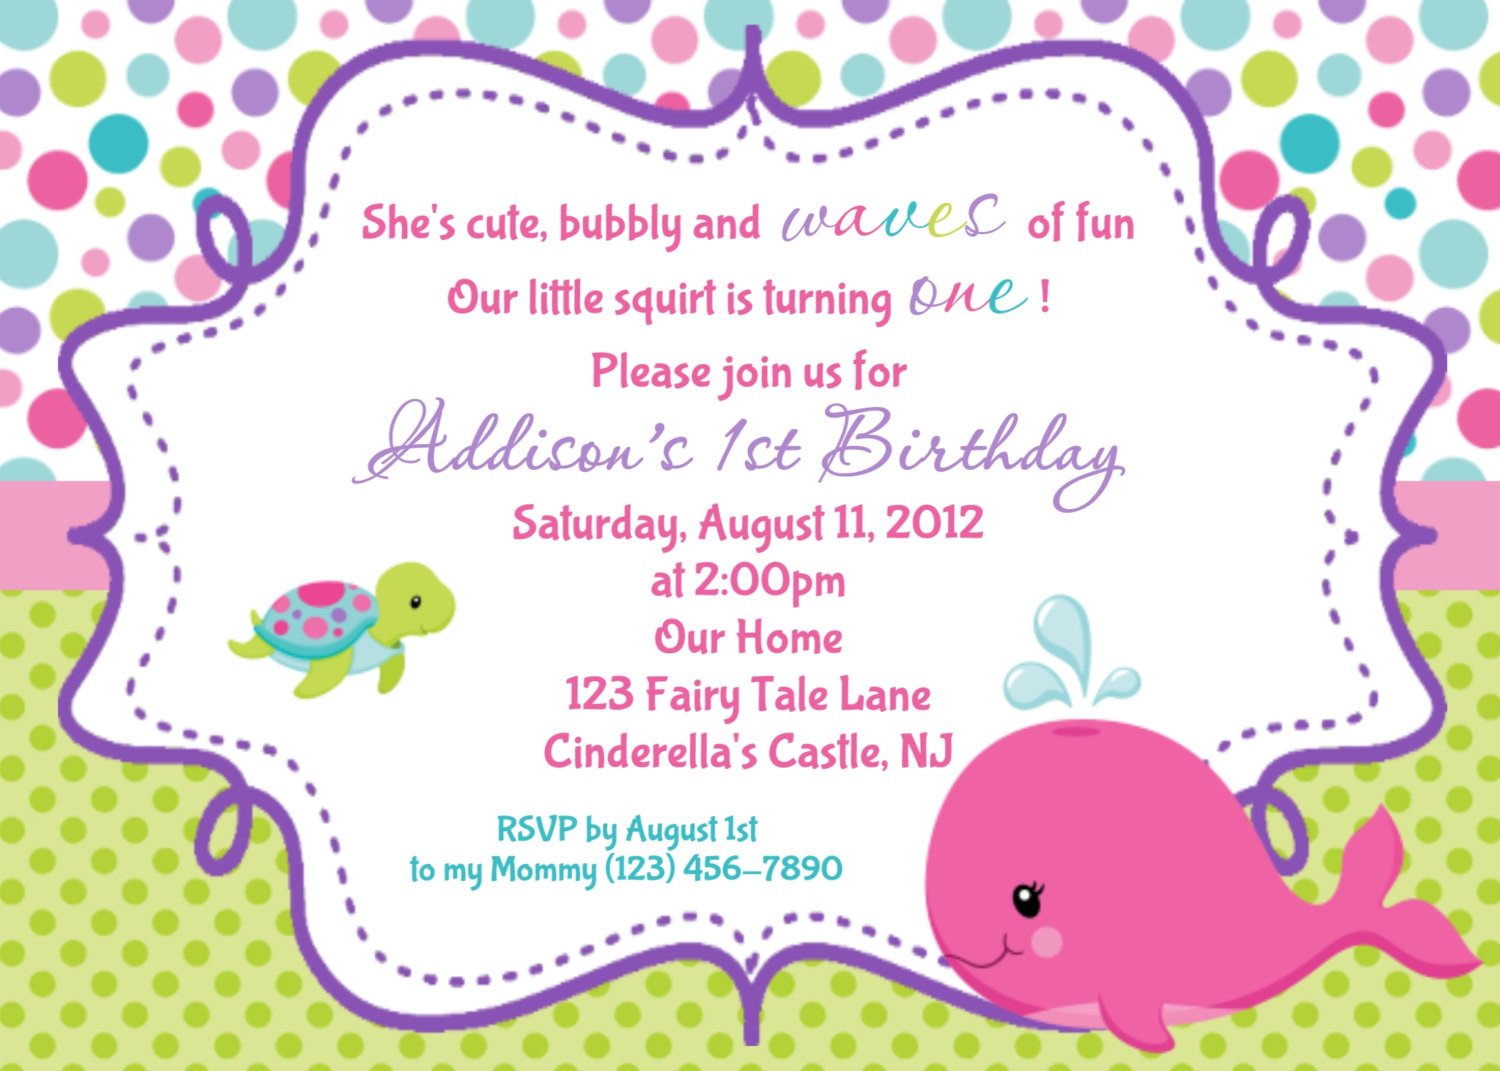 Personalized Birthday Invitations
 Whale Birthday Invitation Personalized by afairytalebeginning